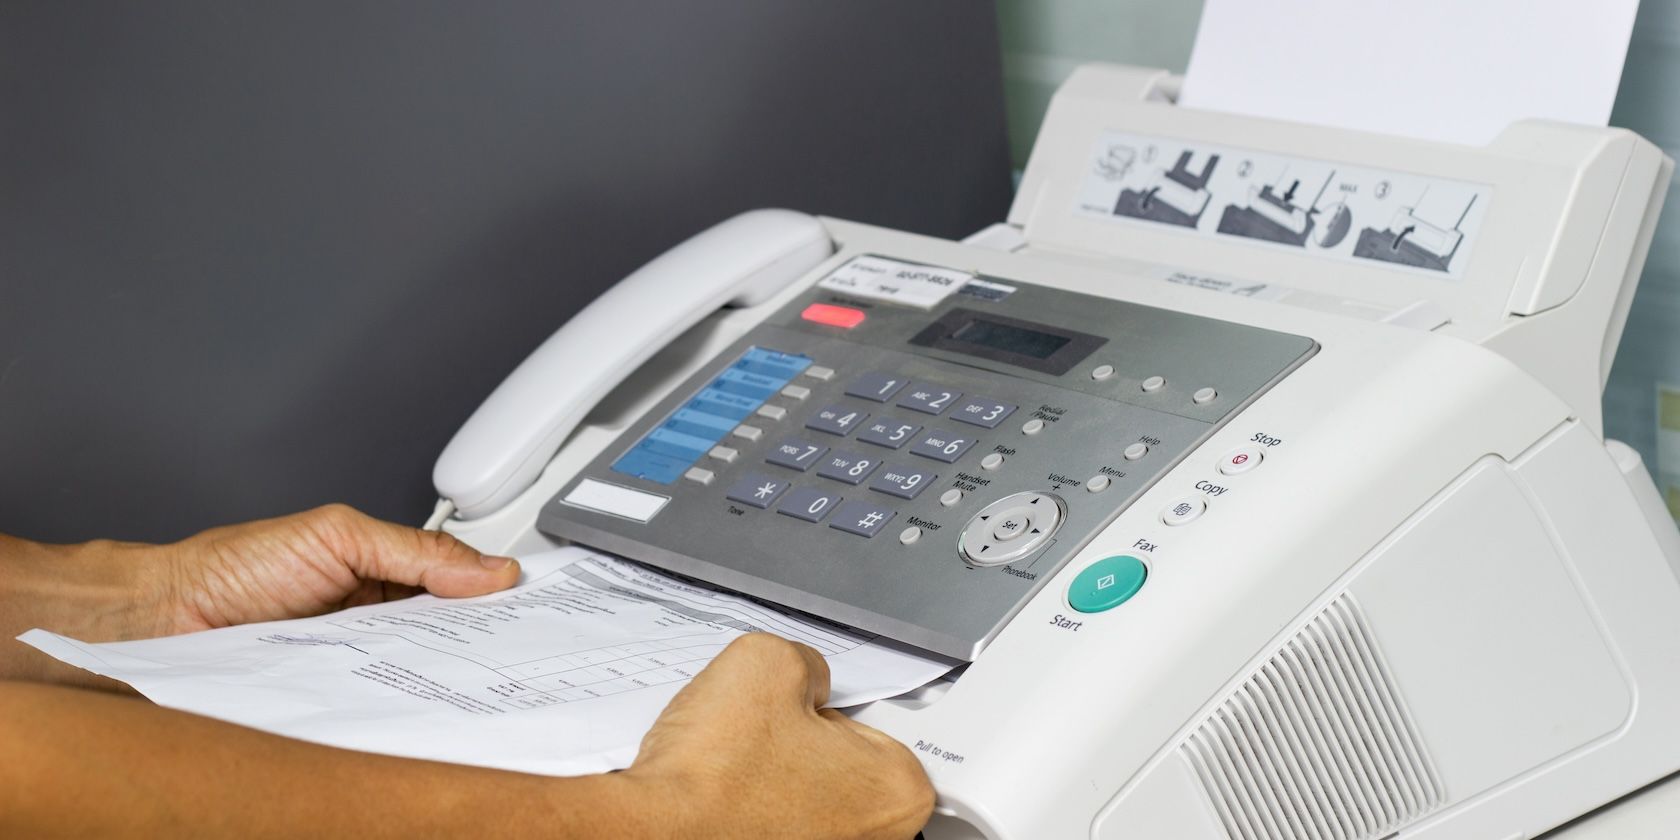 Hands feeding a piece of paper into a bulky fax machine with a telephone receiver and a panel of buttons.